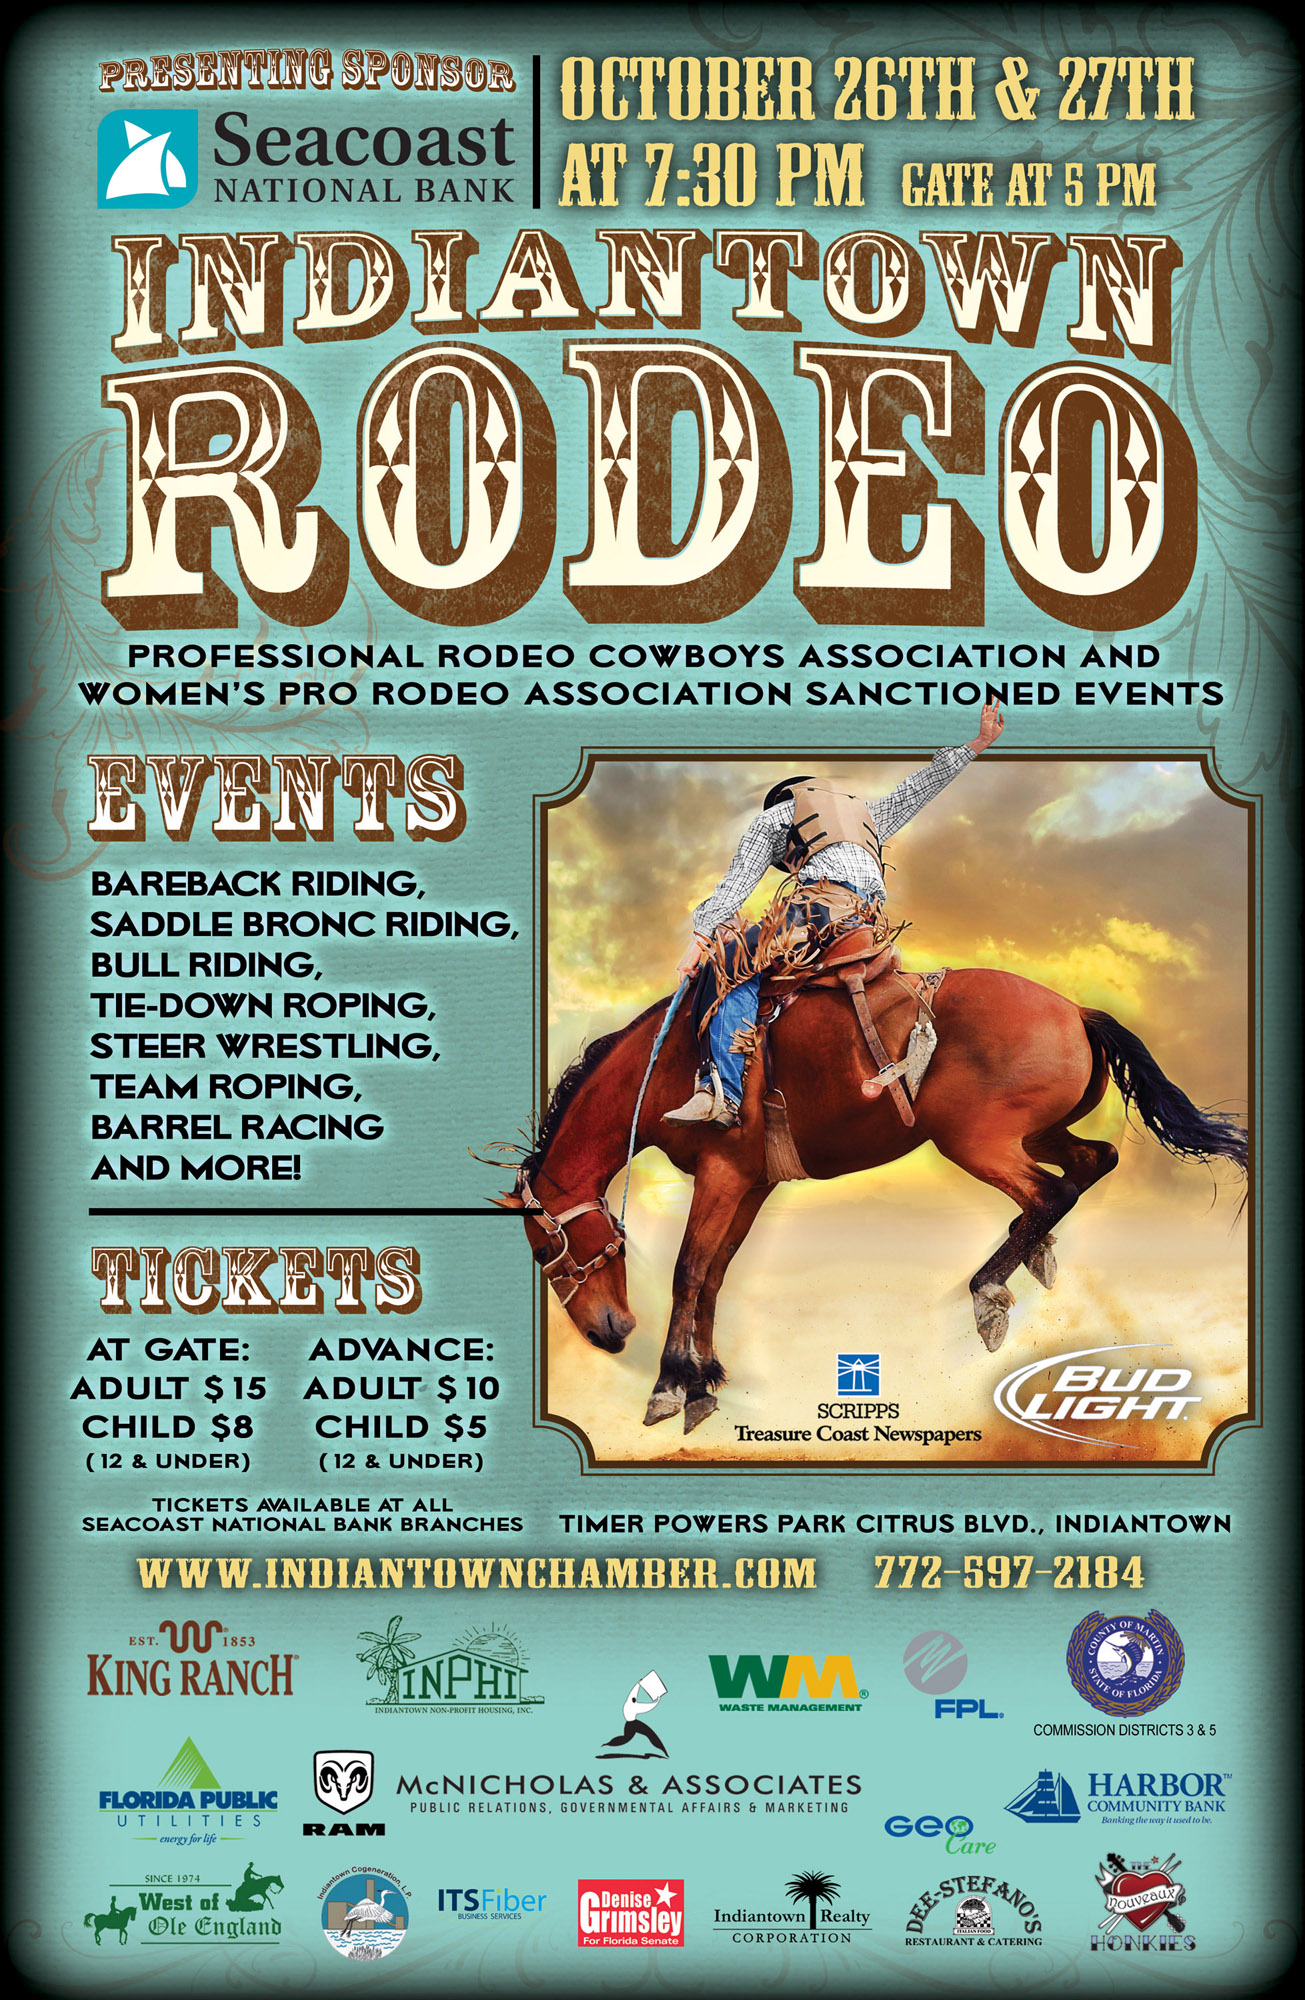 Indiantown Chamber of Commerce PRCA / WPRA 2nd Annual Rodeo